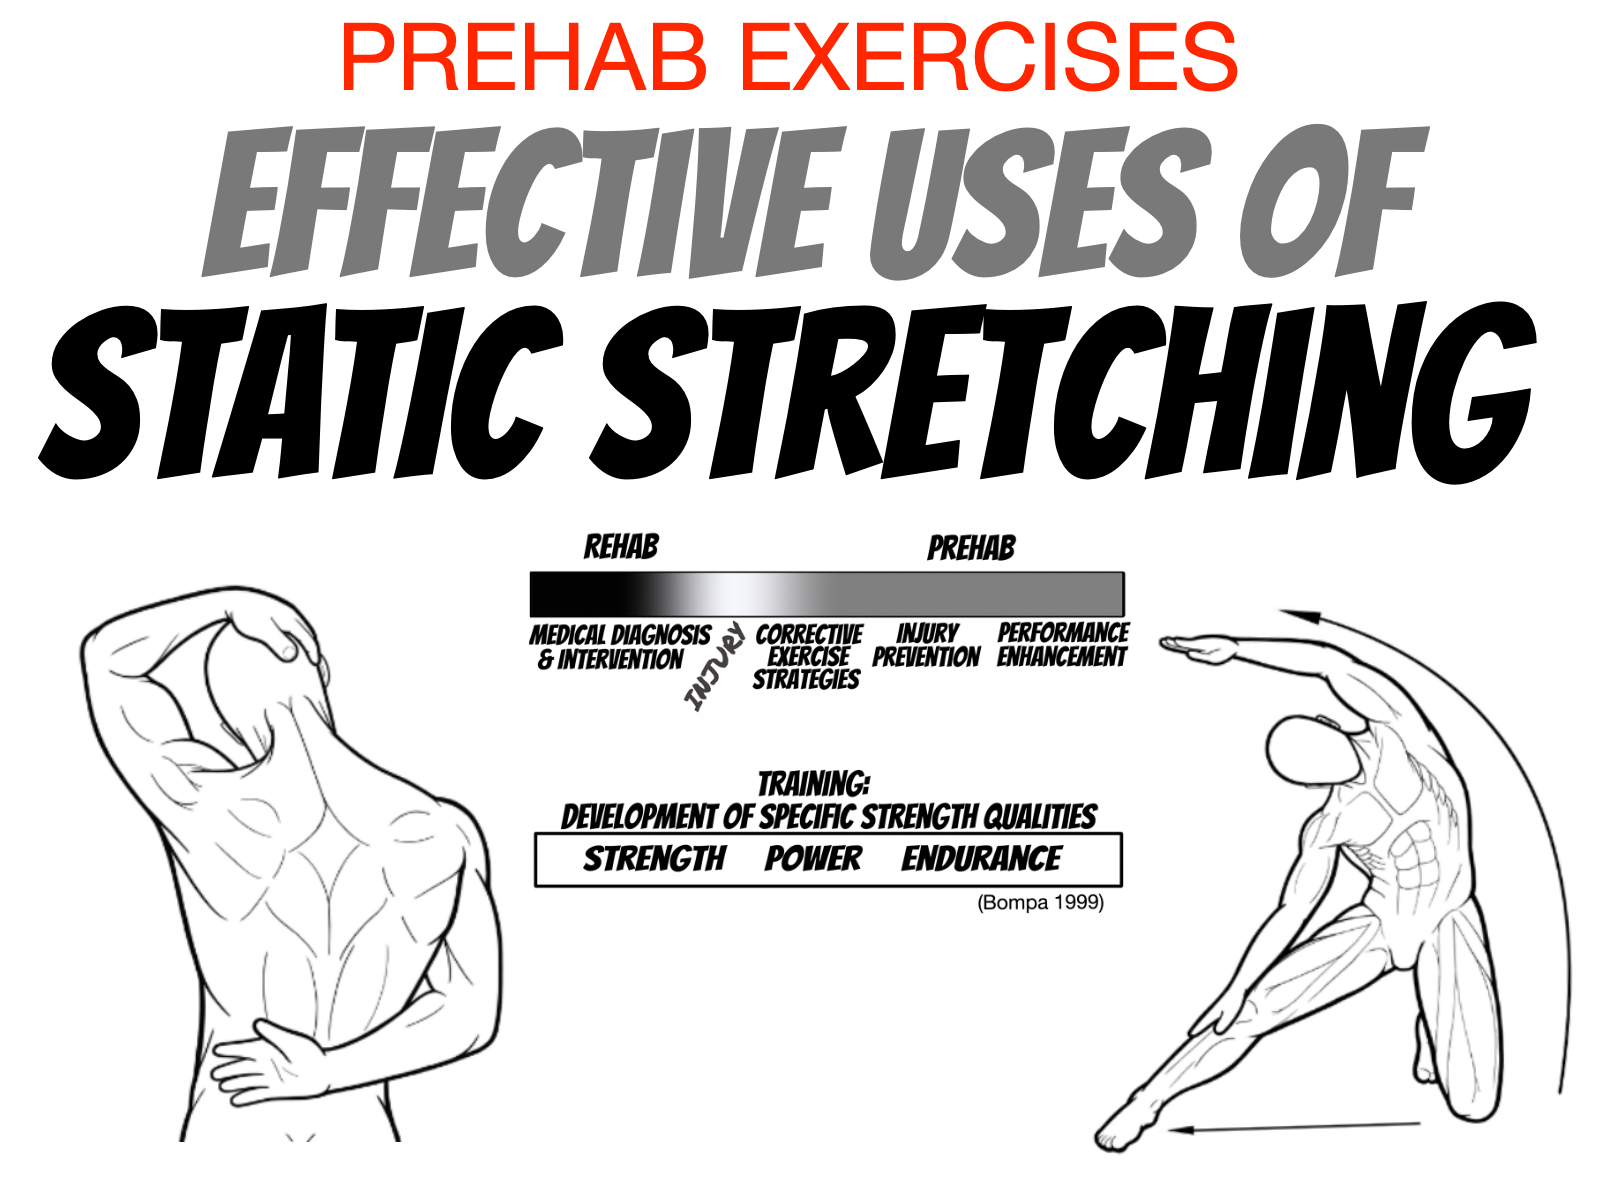 StretchMed Winchester - Doing plantar flexion exercises is crucial